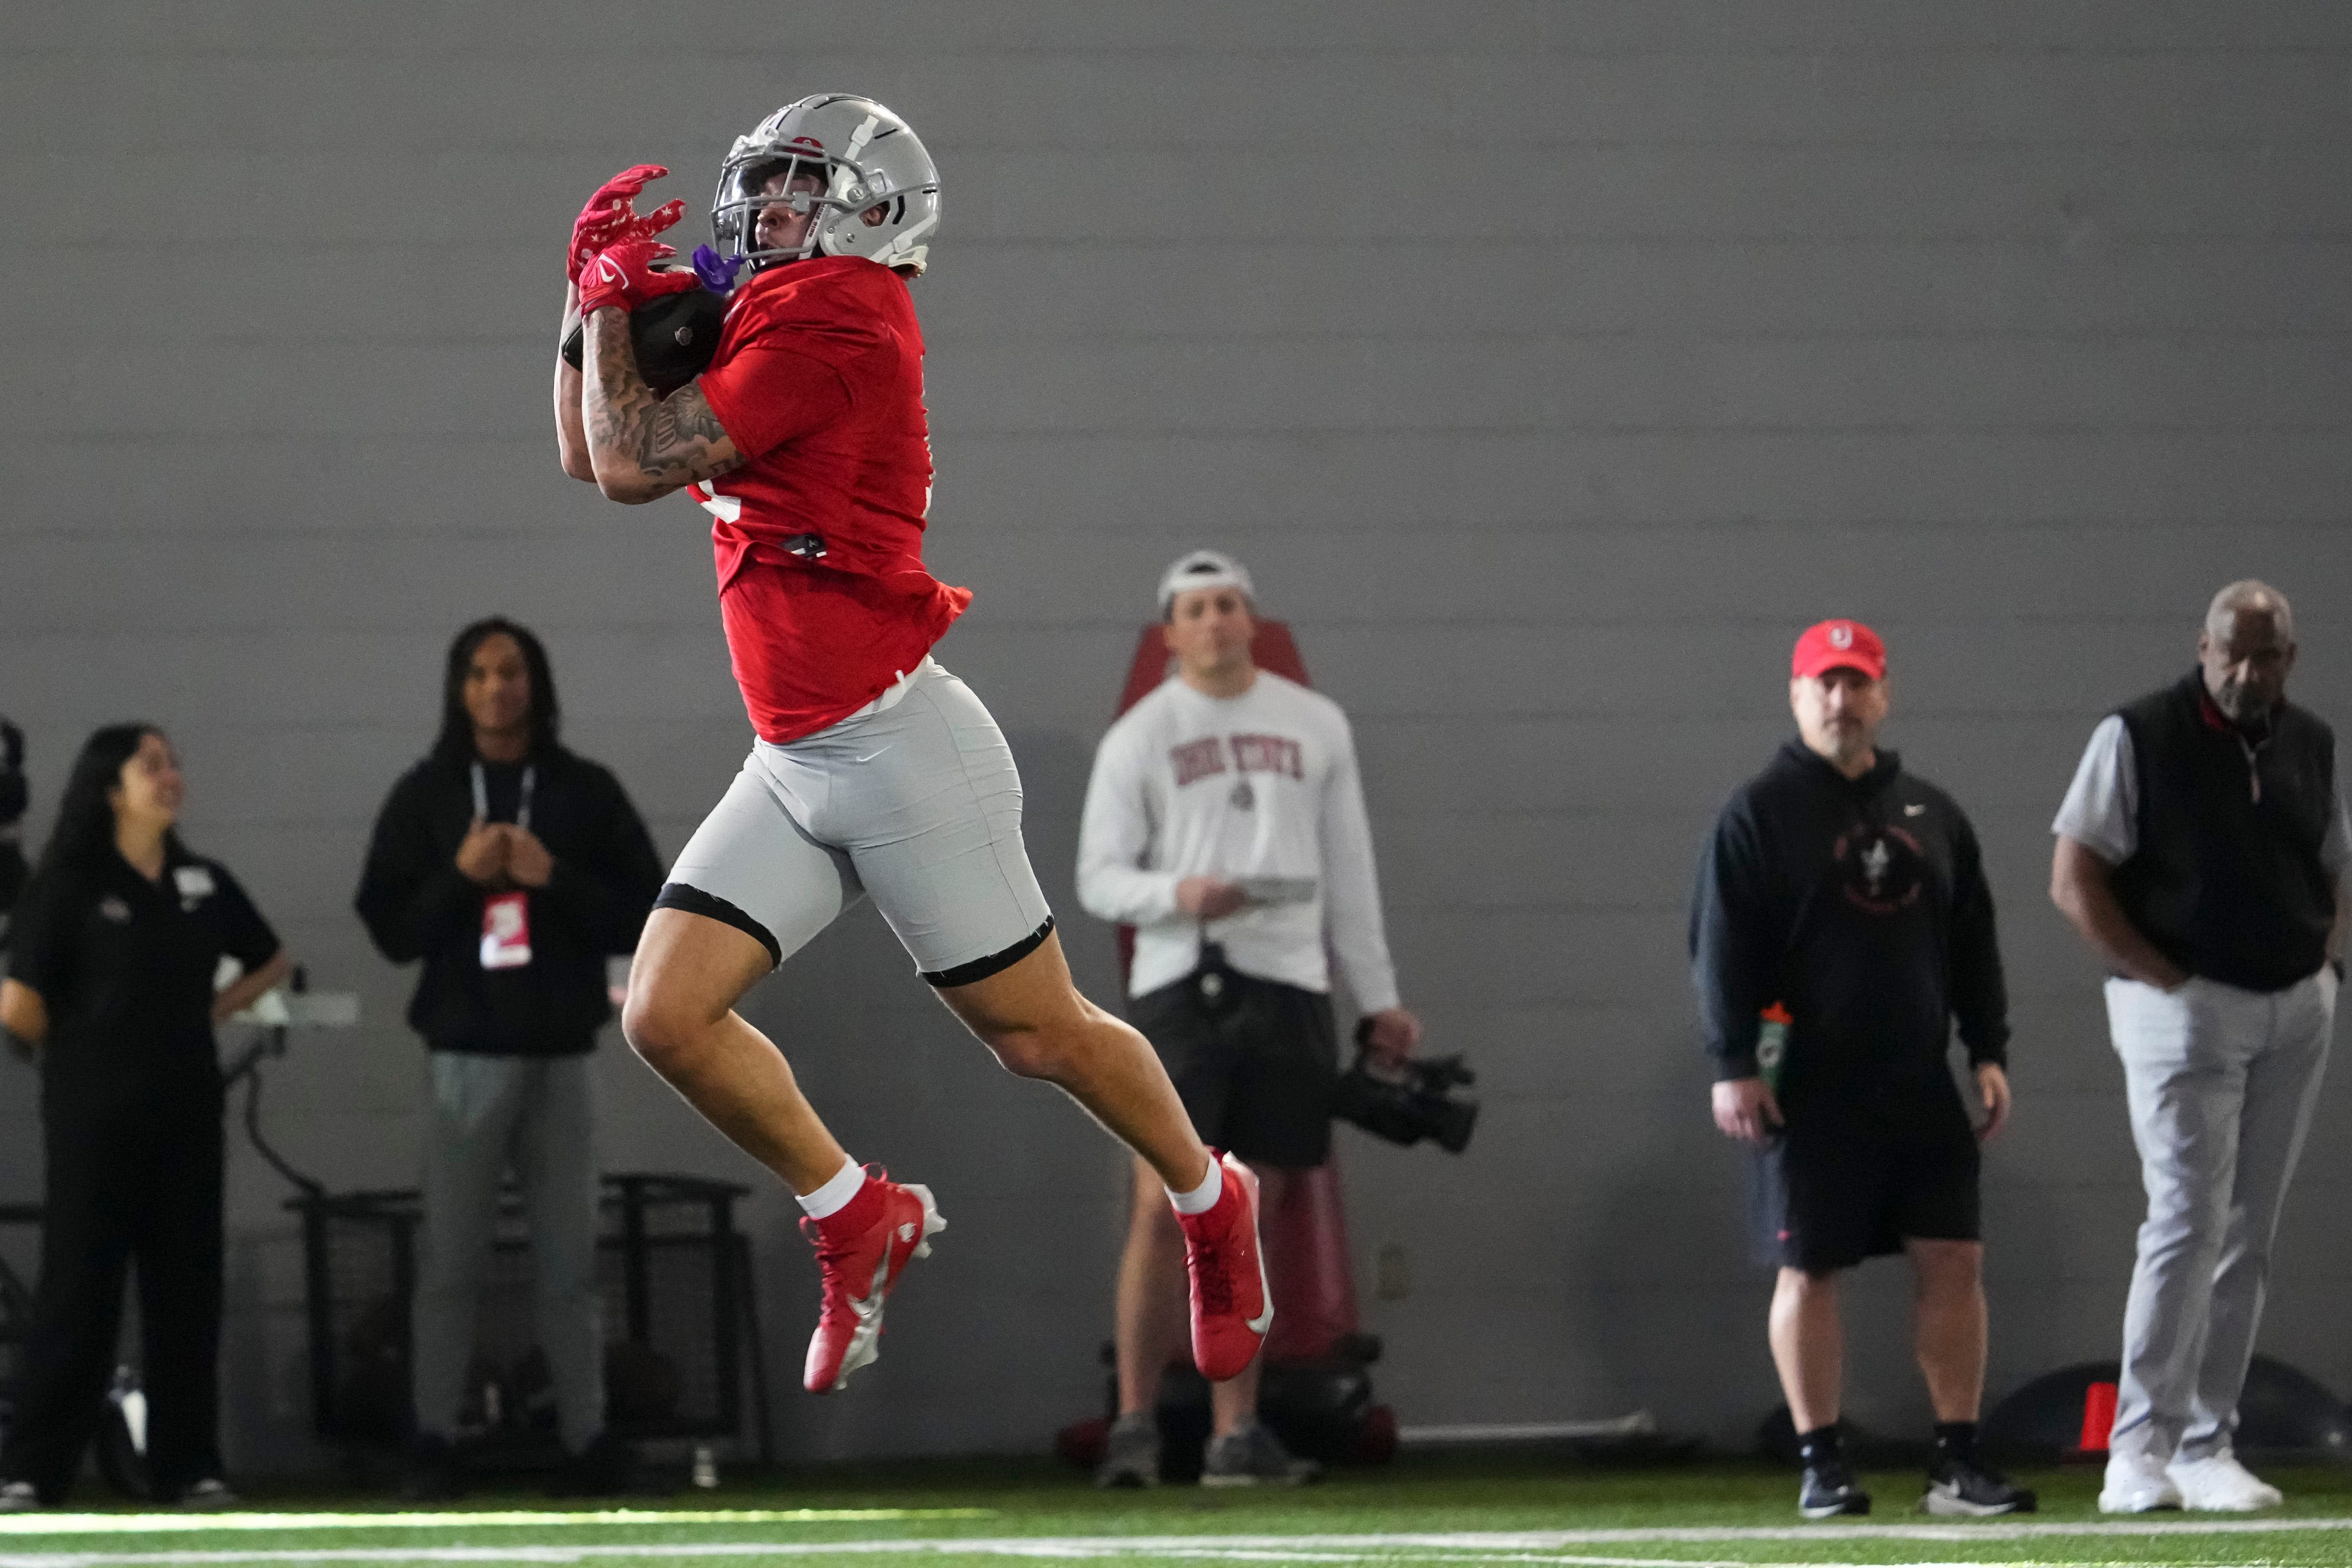 Ohio State WR Brandon Inniss back to full strength after injuring foot in spring practice